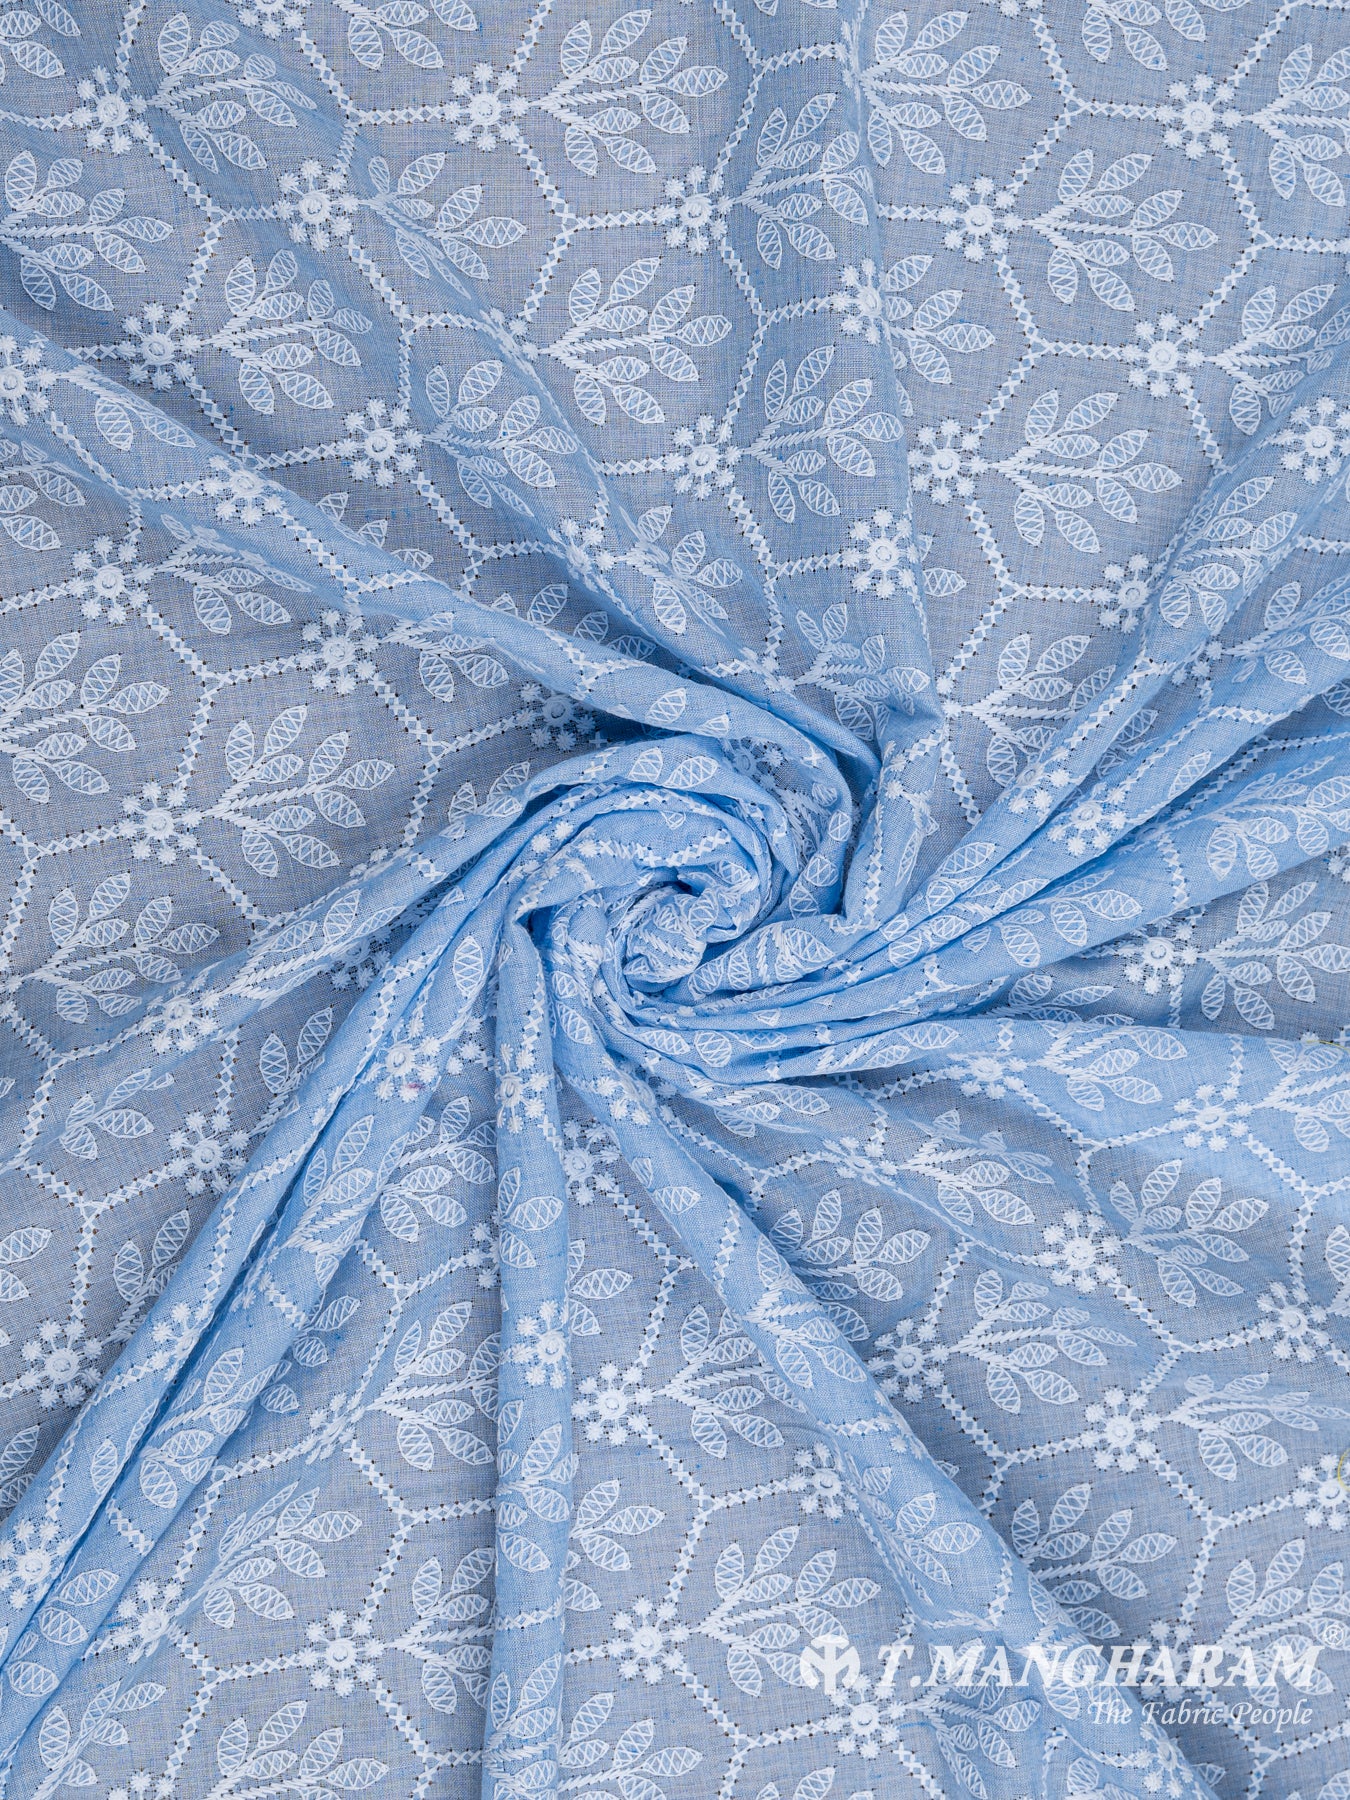 Blue Cotton Embroidery Fabric - EB4809 view-1